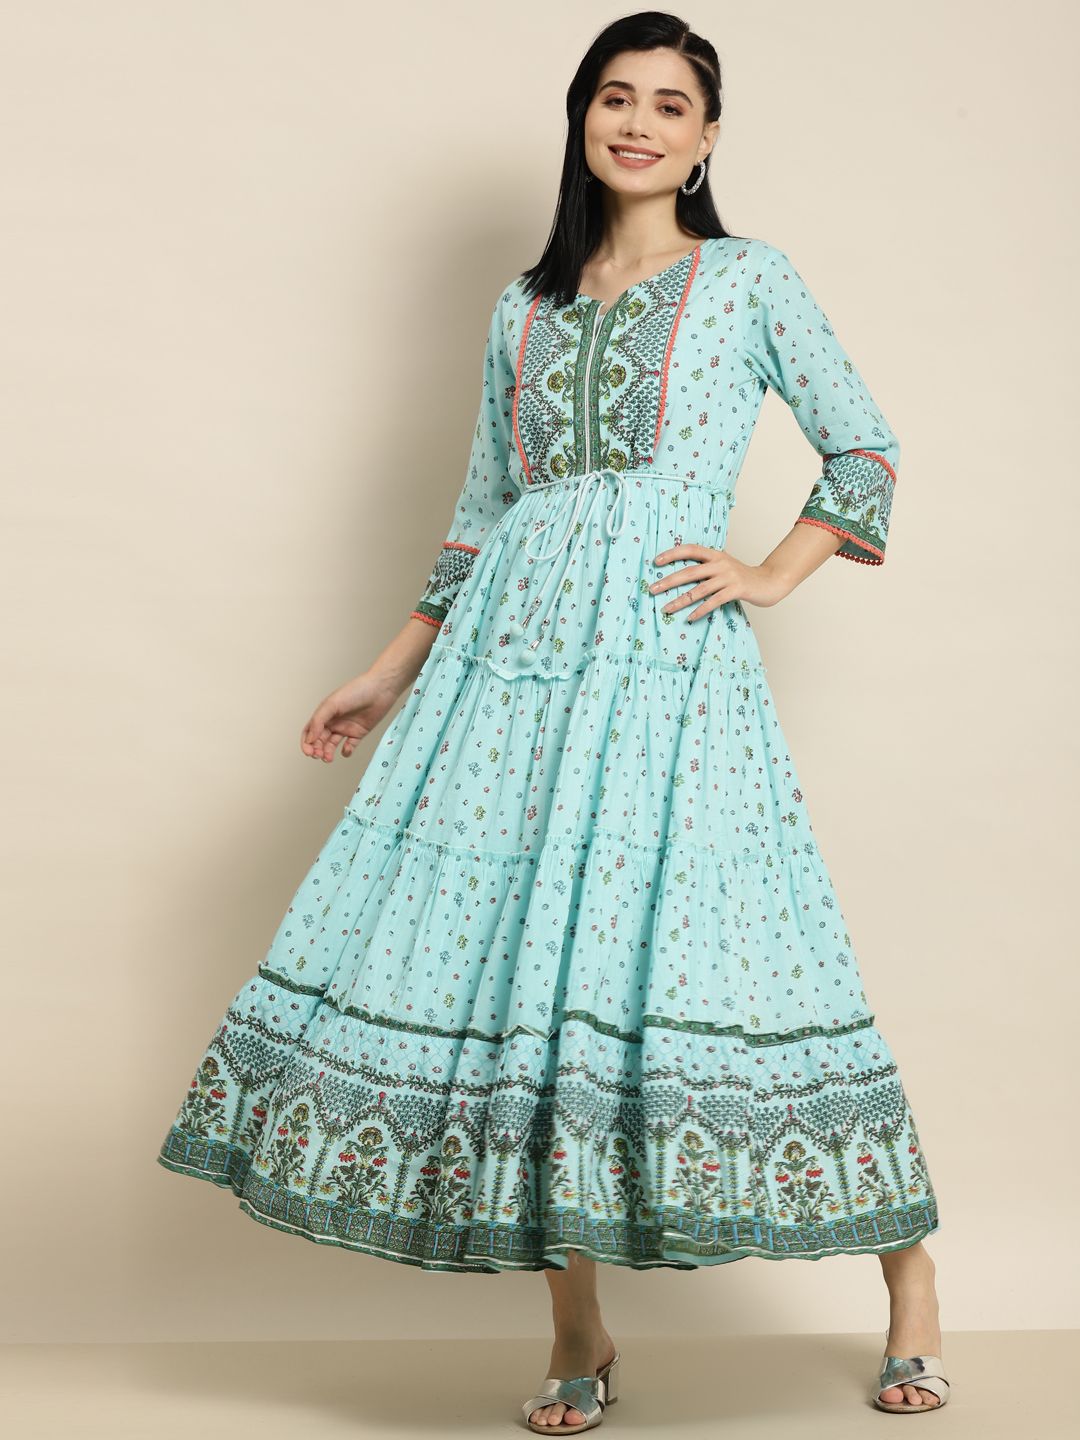 Juniper Blue Printed Tiered Ethnic Dress Price in India